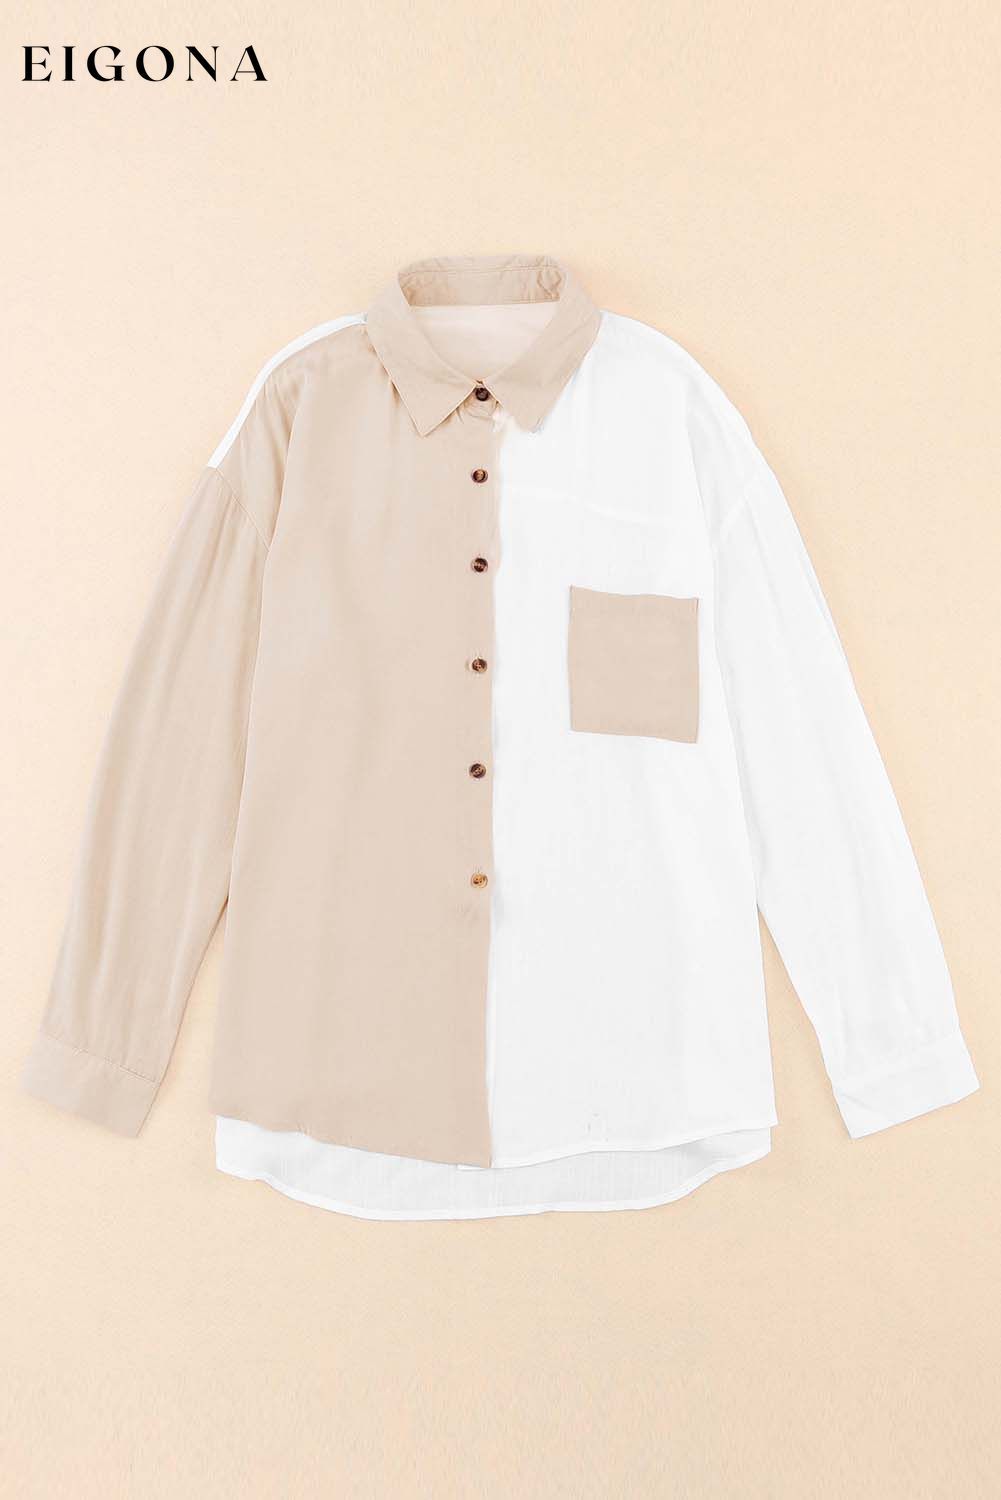 Colorblock Buttons Shirt-Collar Long Sleeve Pocket Blouse All In Stock clothes Occasion Daily Print Color Block Season Fall & Autumn Season Spring Style Casual